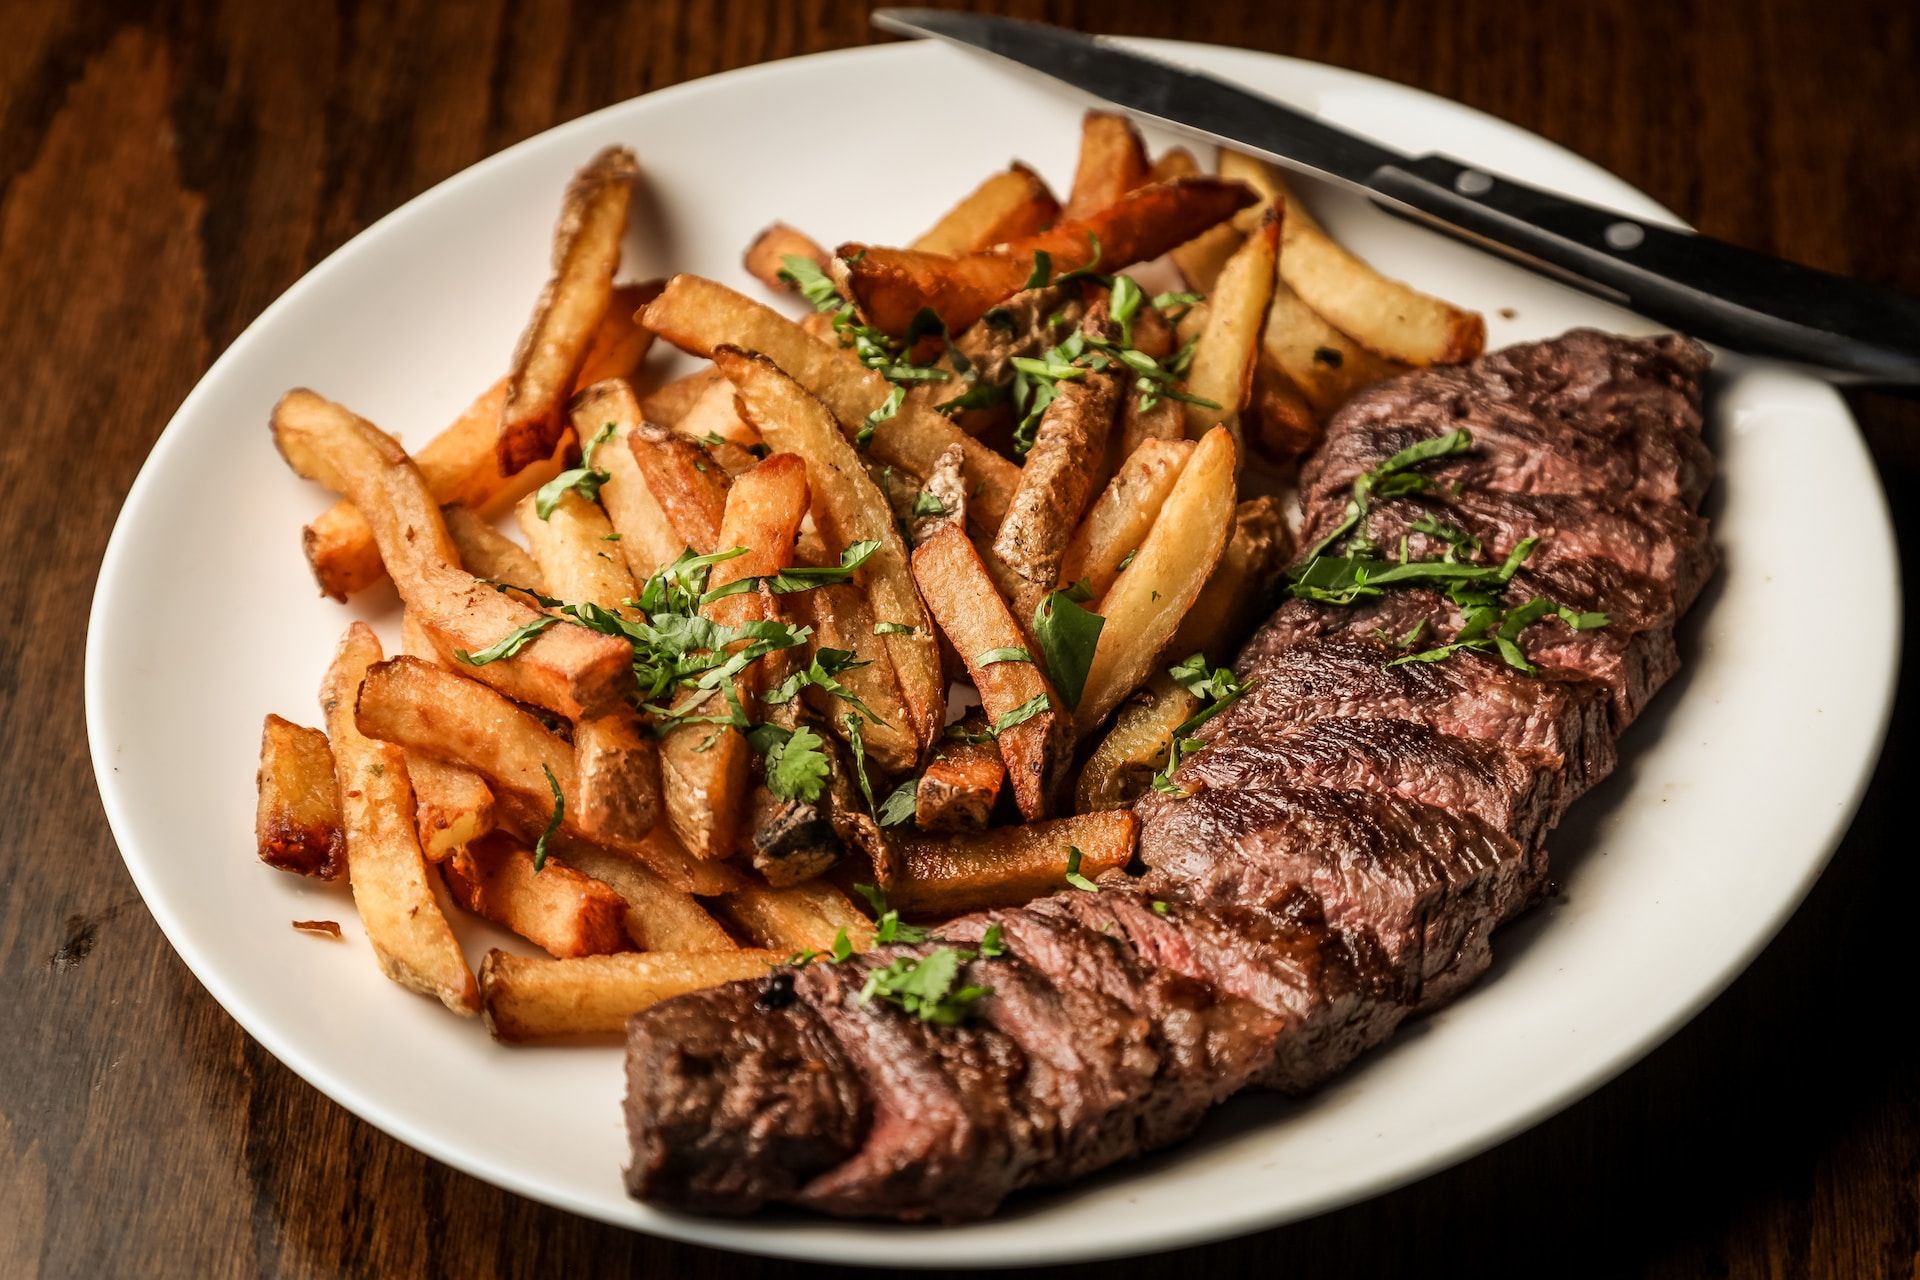 A white plate topped with steak and french fries on a wooden table.